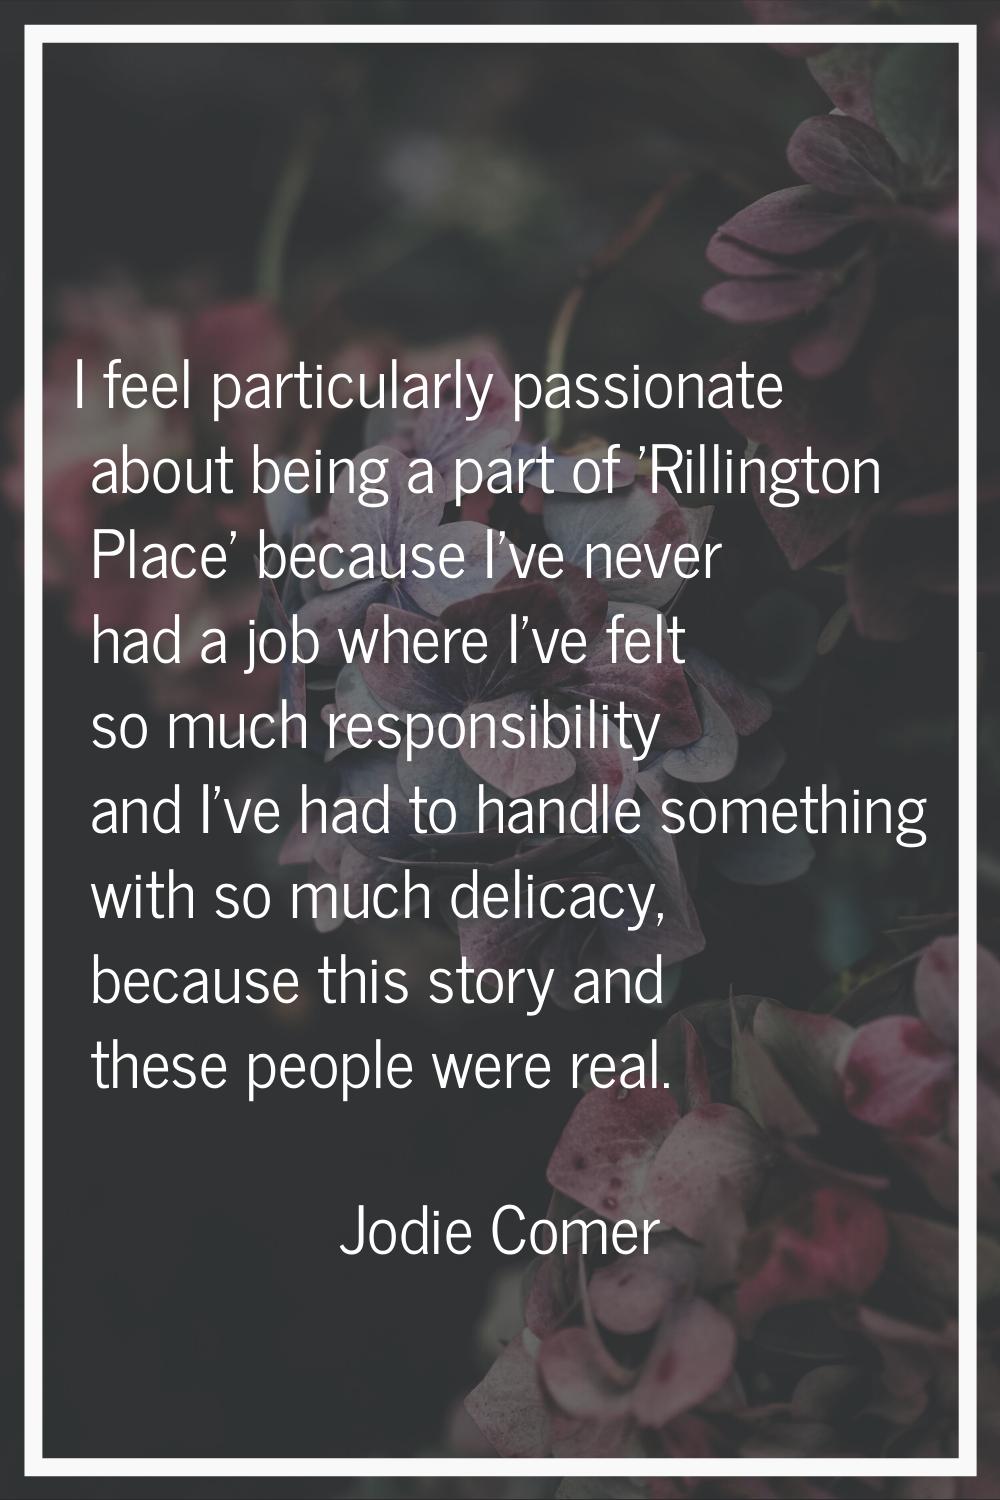 I feel particularly passionate about being a part of 'Rillington Place' because I've never had a jo